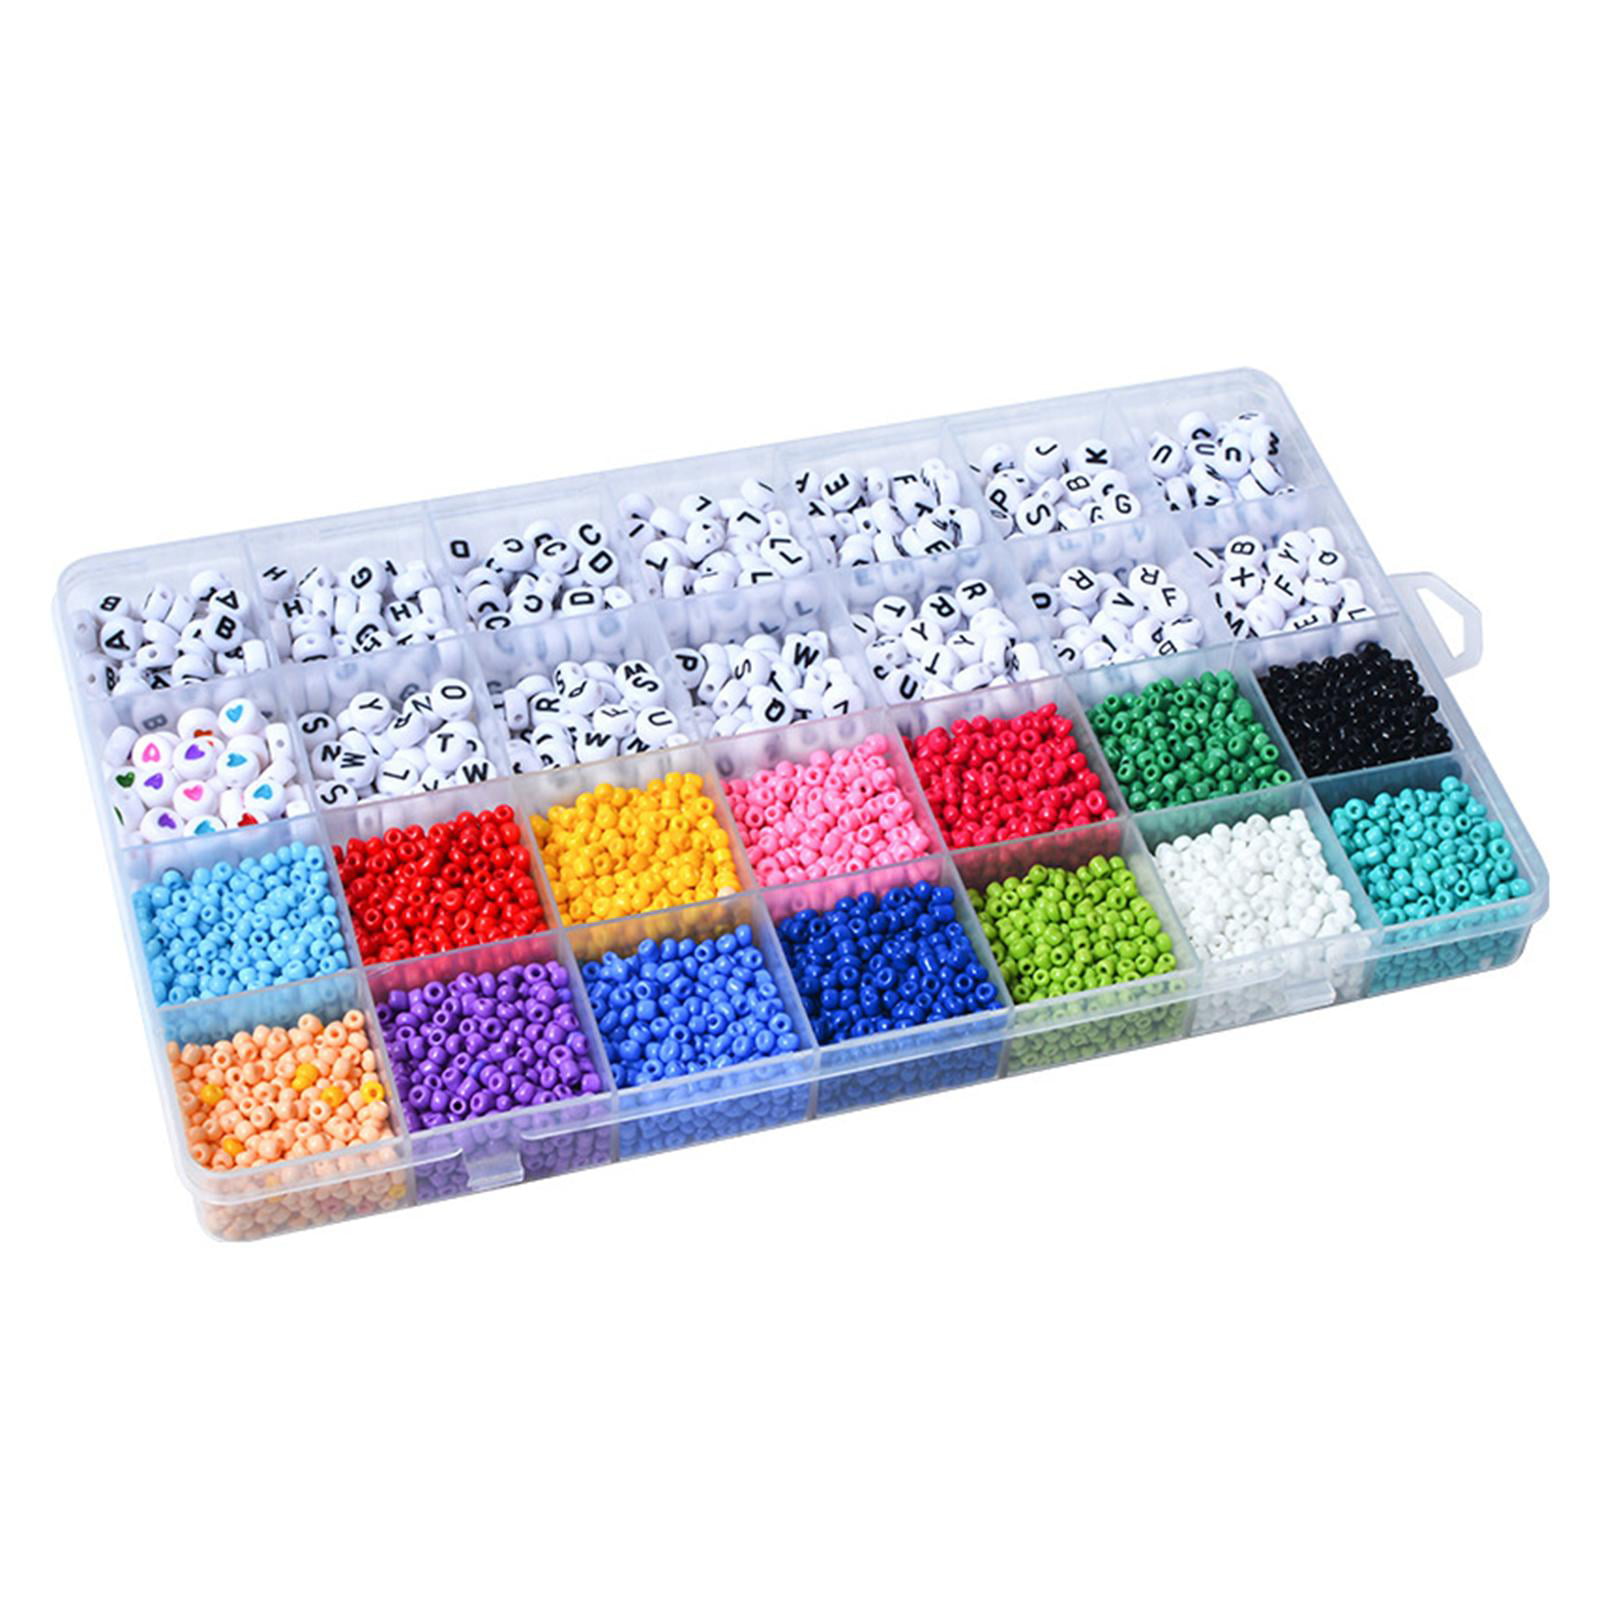 GOELX Glass Beads 12 Colors for Beading Stringing Jewellery Making, Crafts,  Bead Size 8Mm, Total Beads 240 with Mini Storage Organizers!!